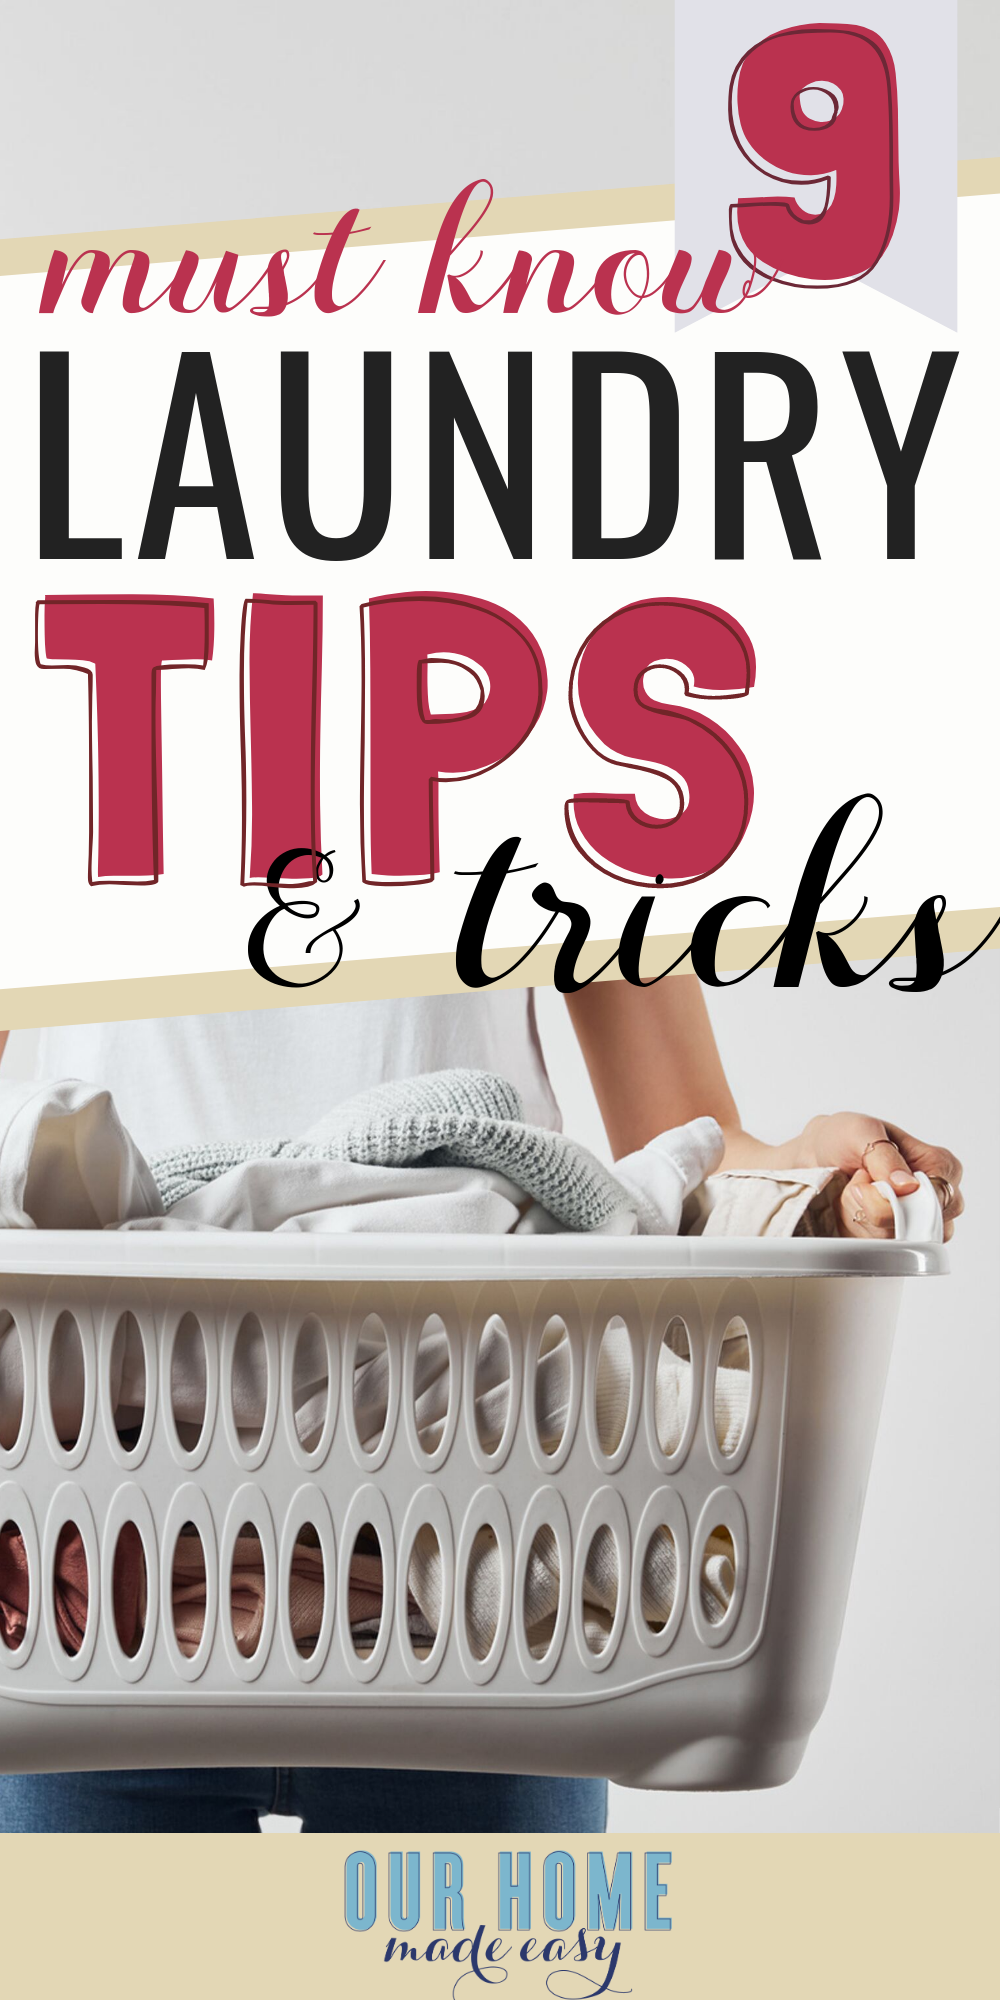 https://www.ourhomemadeeasy.com/wp-content/uploads/2018/02/laundry-tips-and-tricks.png